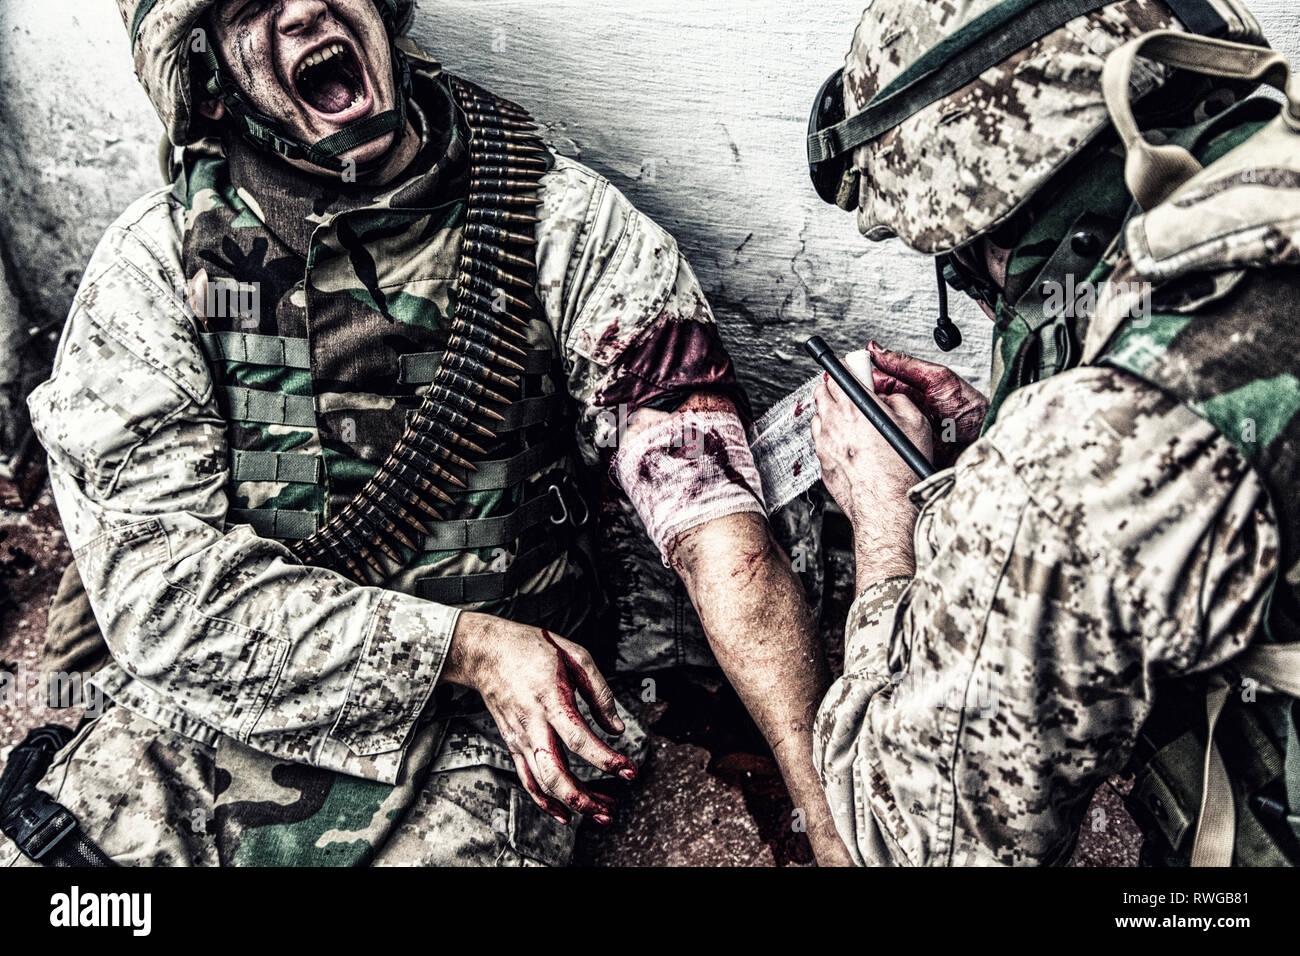 Marine suffering in pain while a military medic applies a bandage to gunshot wound. Stock Photo